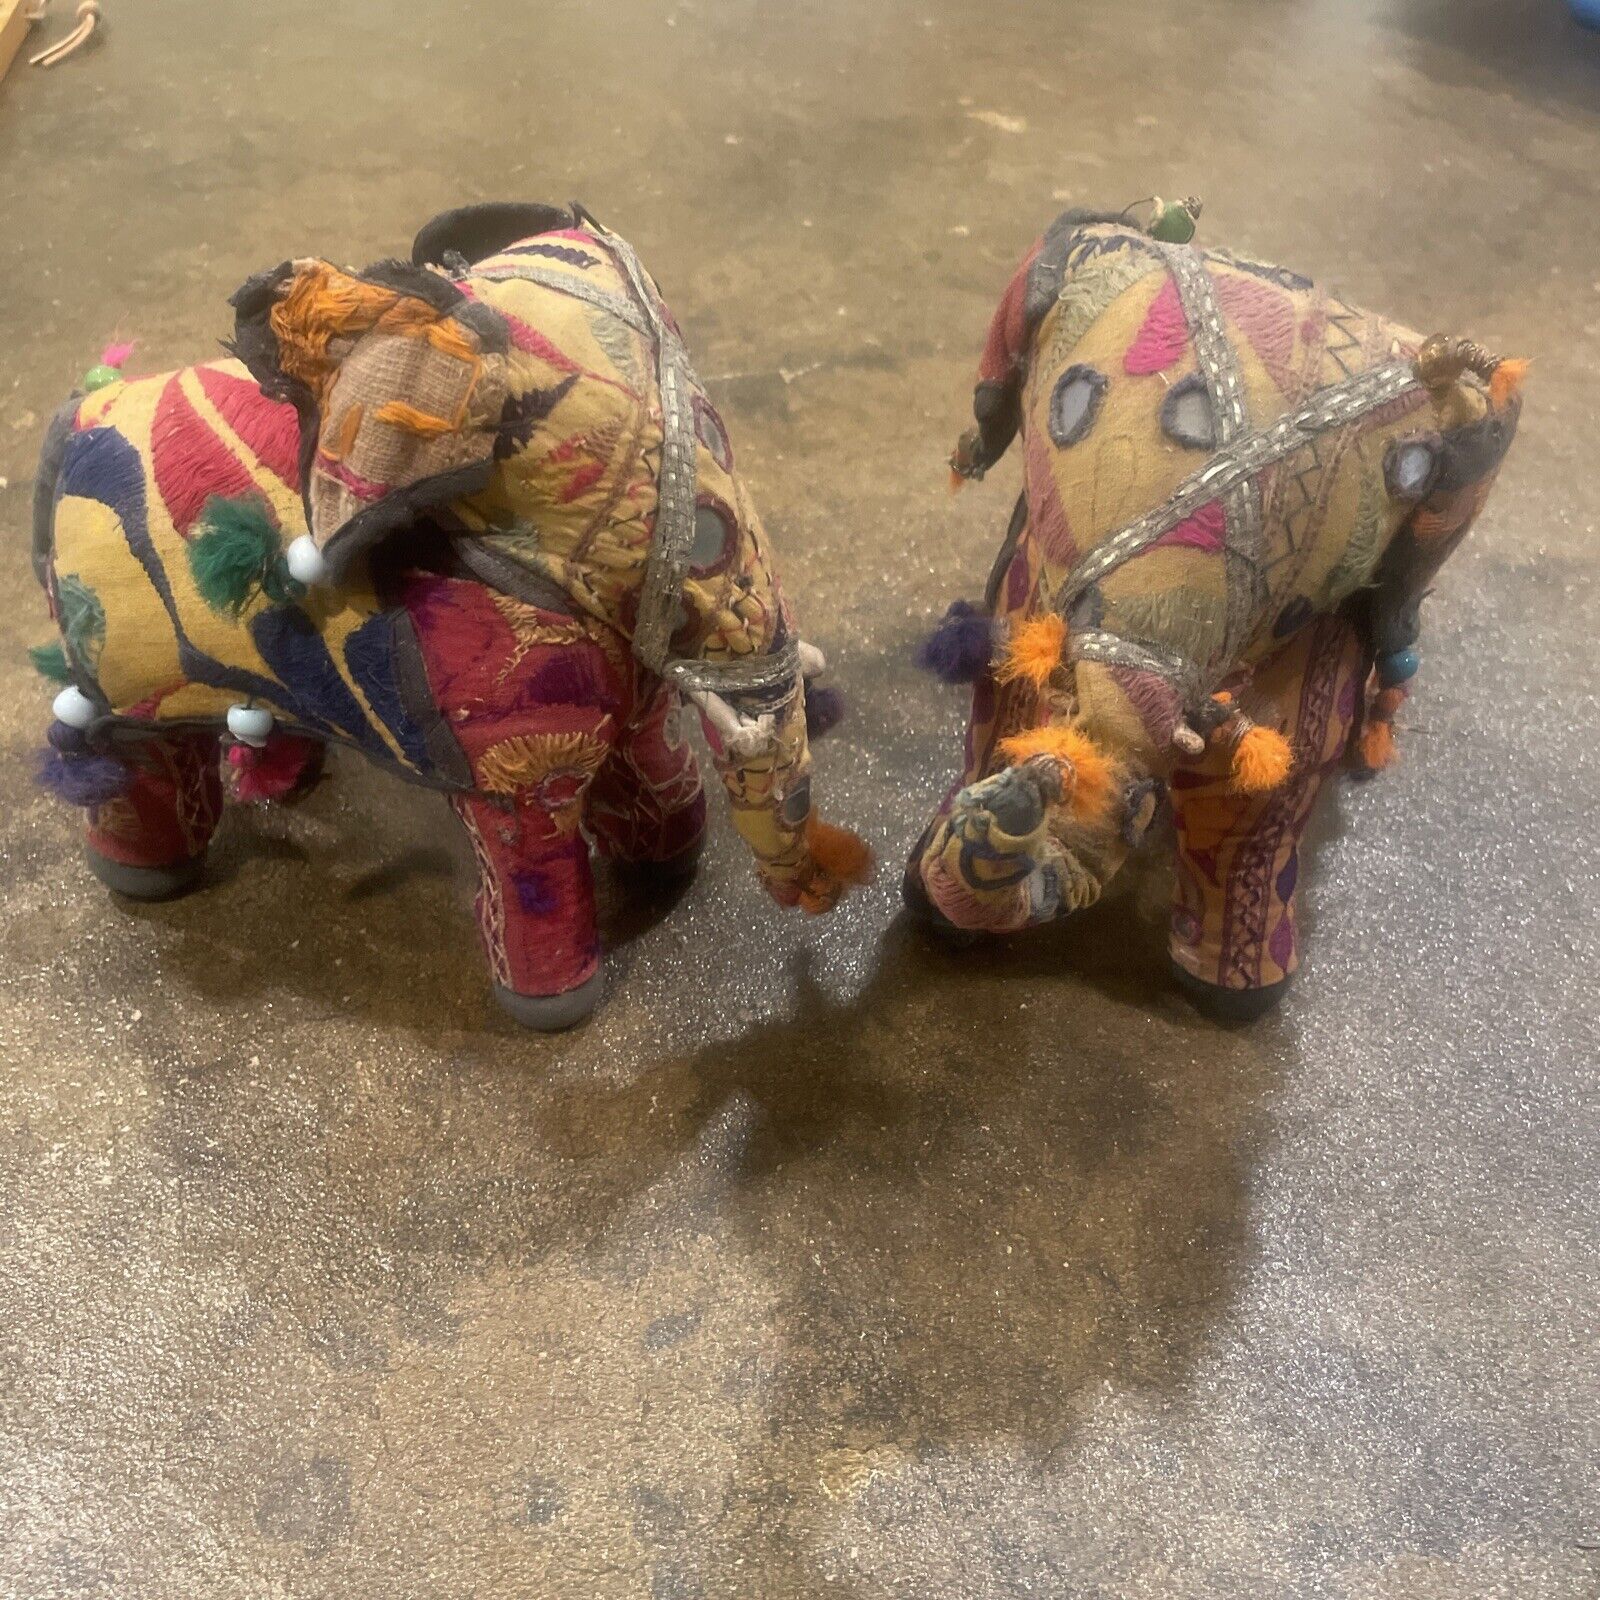 2 Vintage Hand-Crafted ANGLO RAJ Stuffed Cotton Embroidered ELEPHANT India